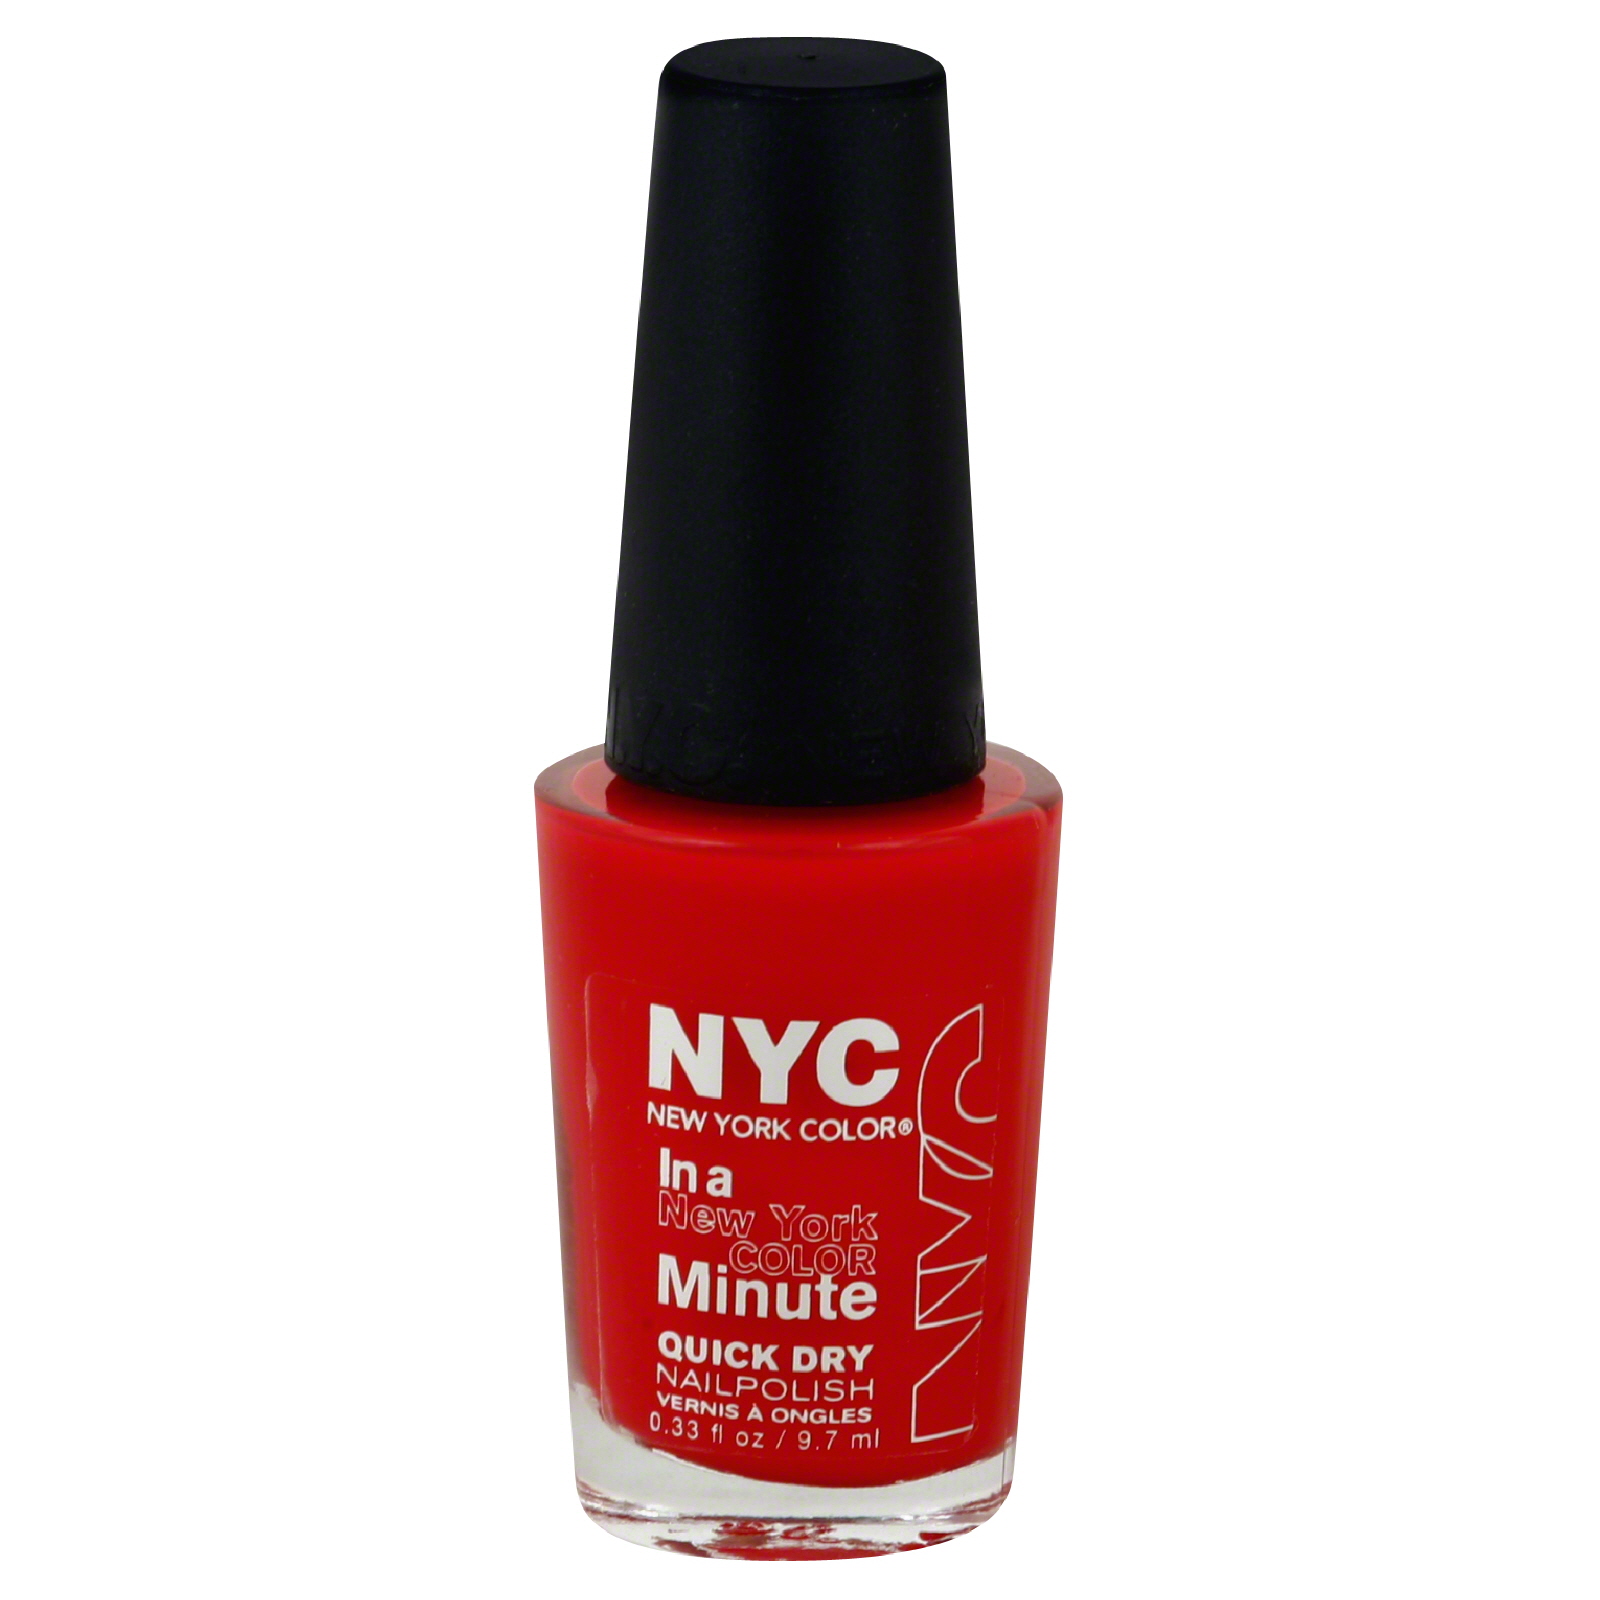 New York Color In a  Minute Quick Dry Nail Polish